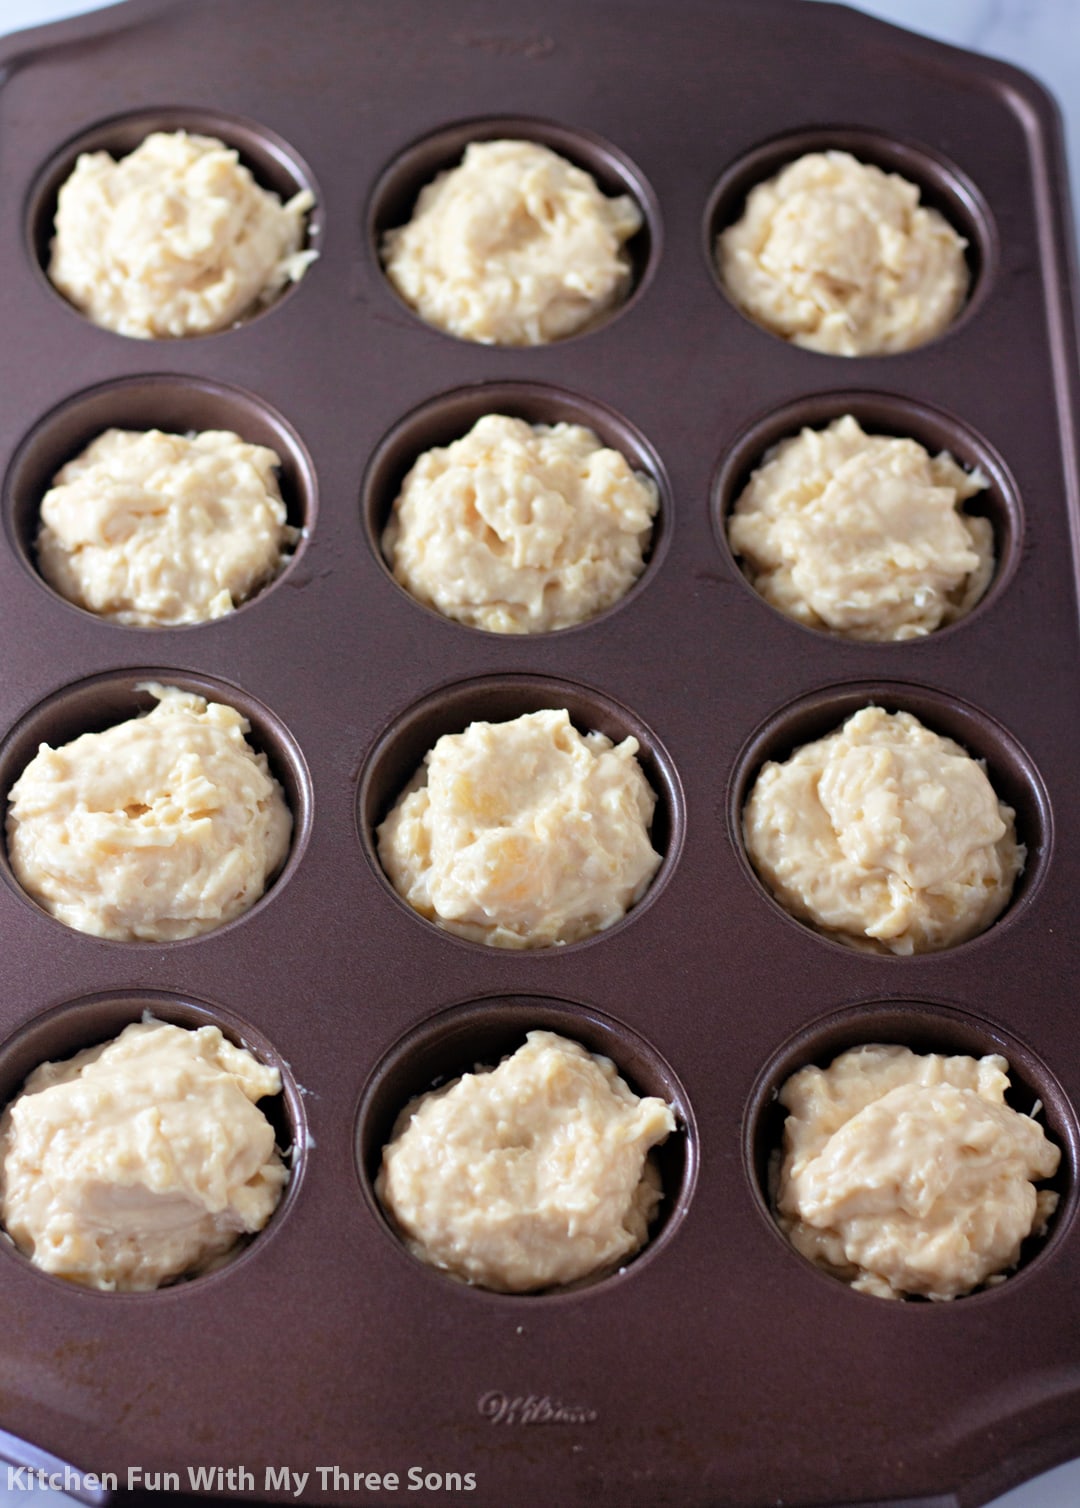 Unbaked tropical muffins in a muffin tin.